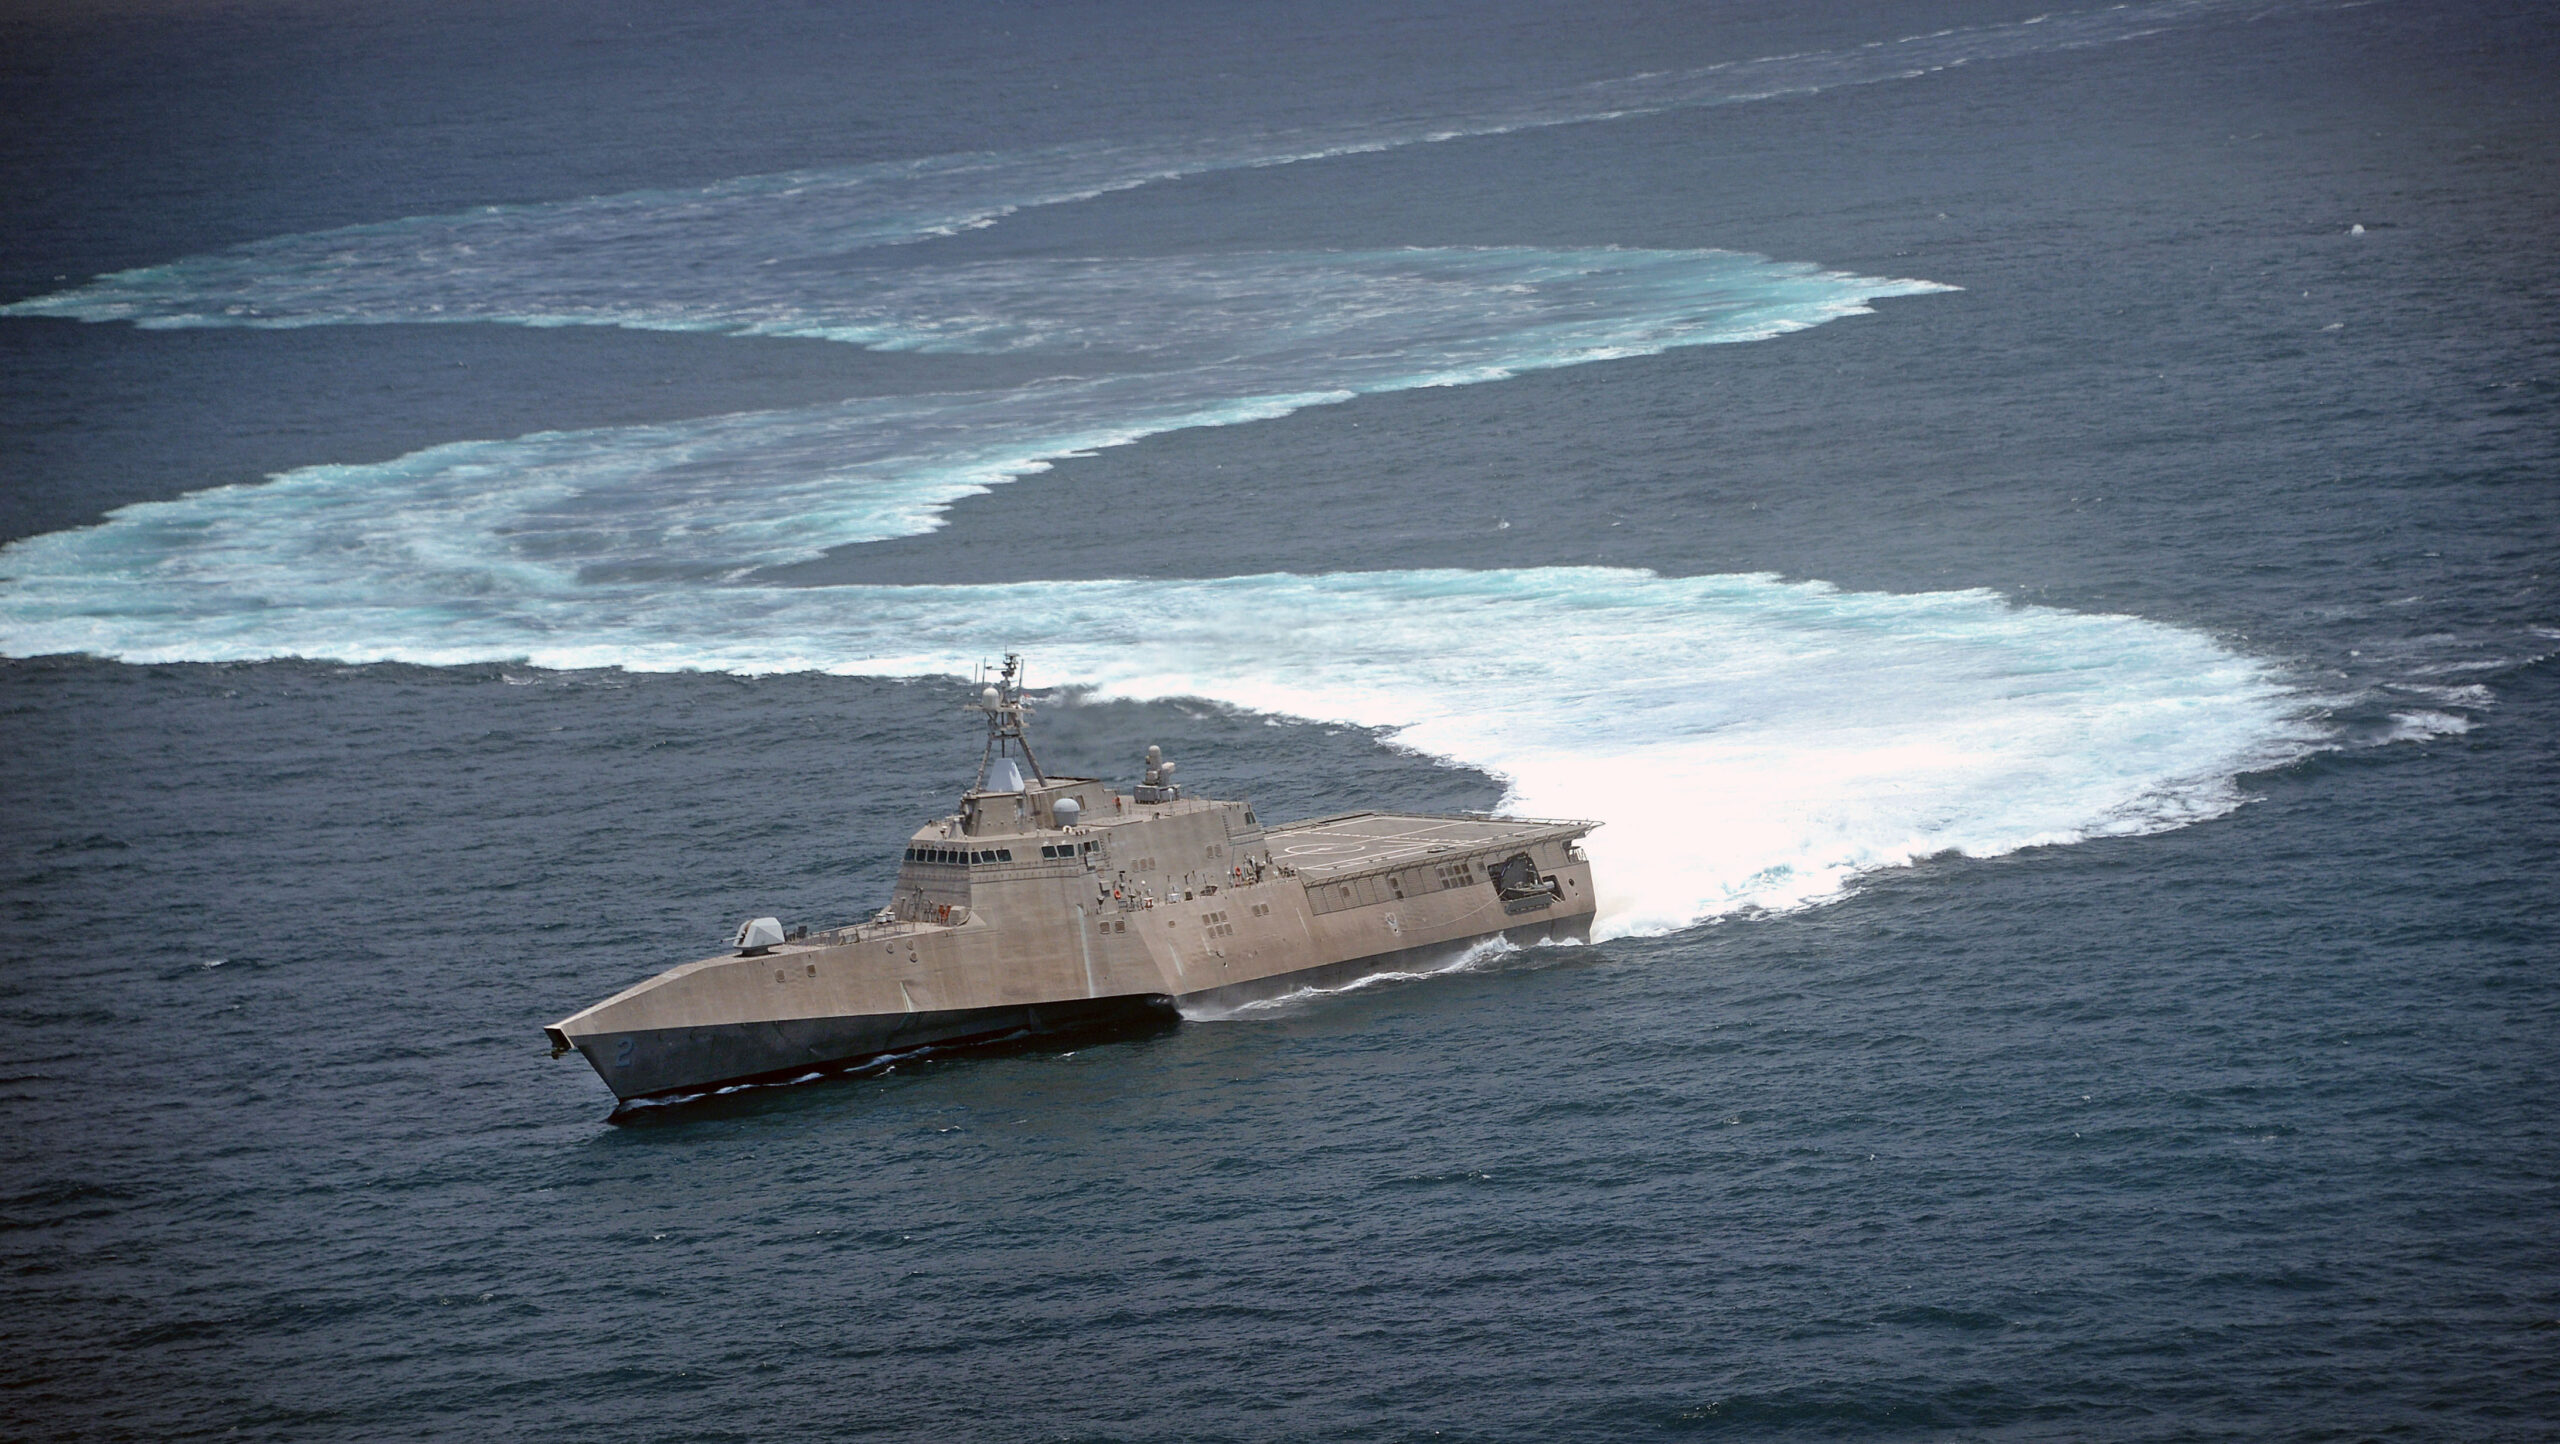 The littoral combat ship USS Independence (LCS 2) demonstrates its maneuvering capabilities in the Pacific Ocean off the coast of San Diego. (U.S. Navy photo by Mass Communication Specialist 2nd Class Daniel M. Young/Released)